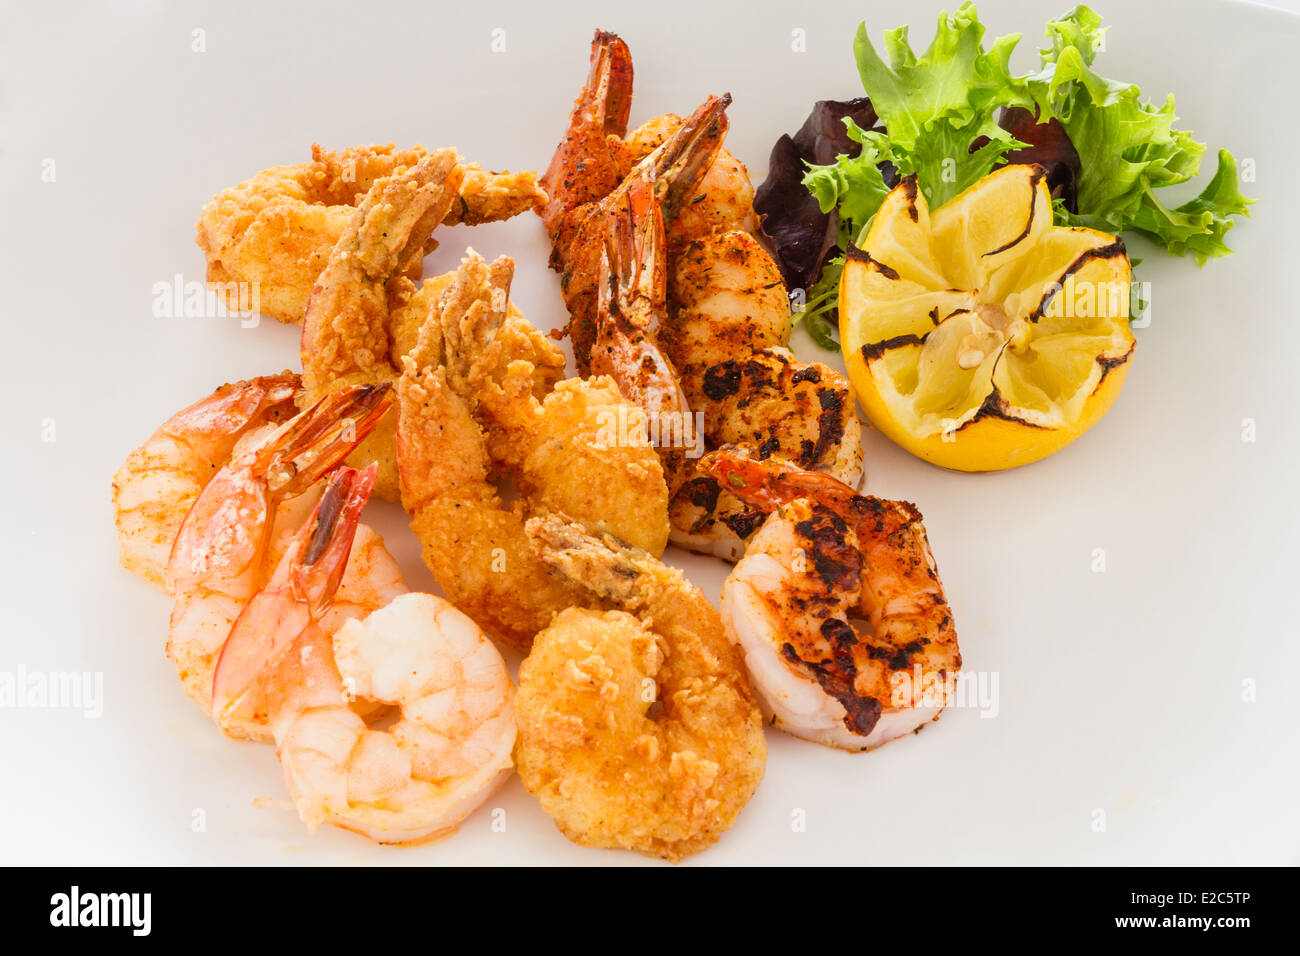 Appetizer of fried, grilled, and blackened shrimp. Stock Photo